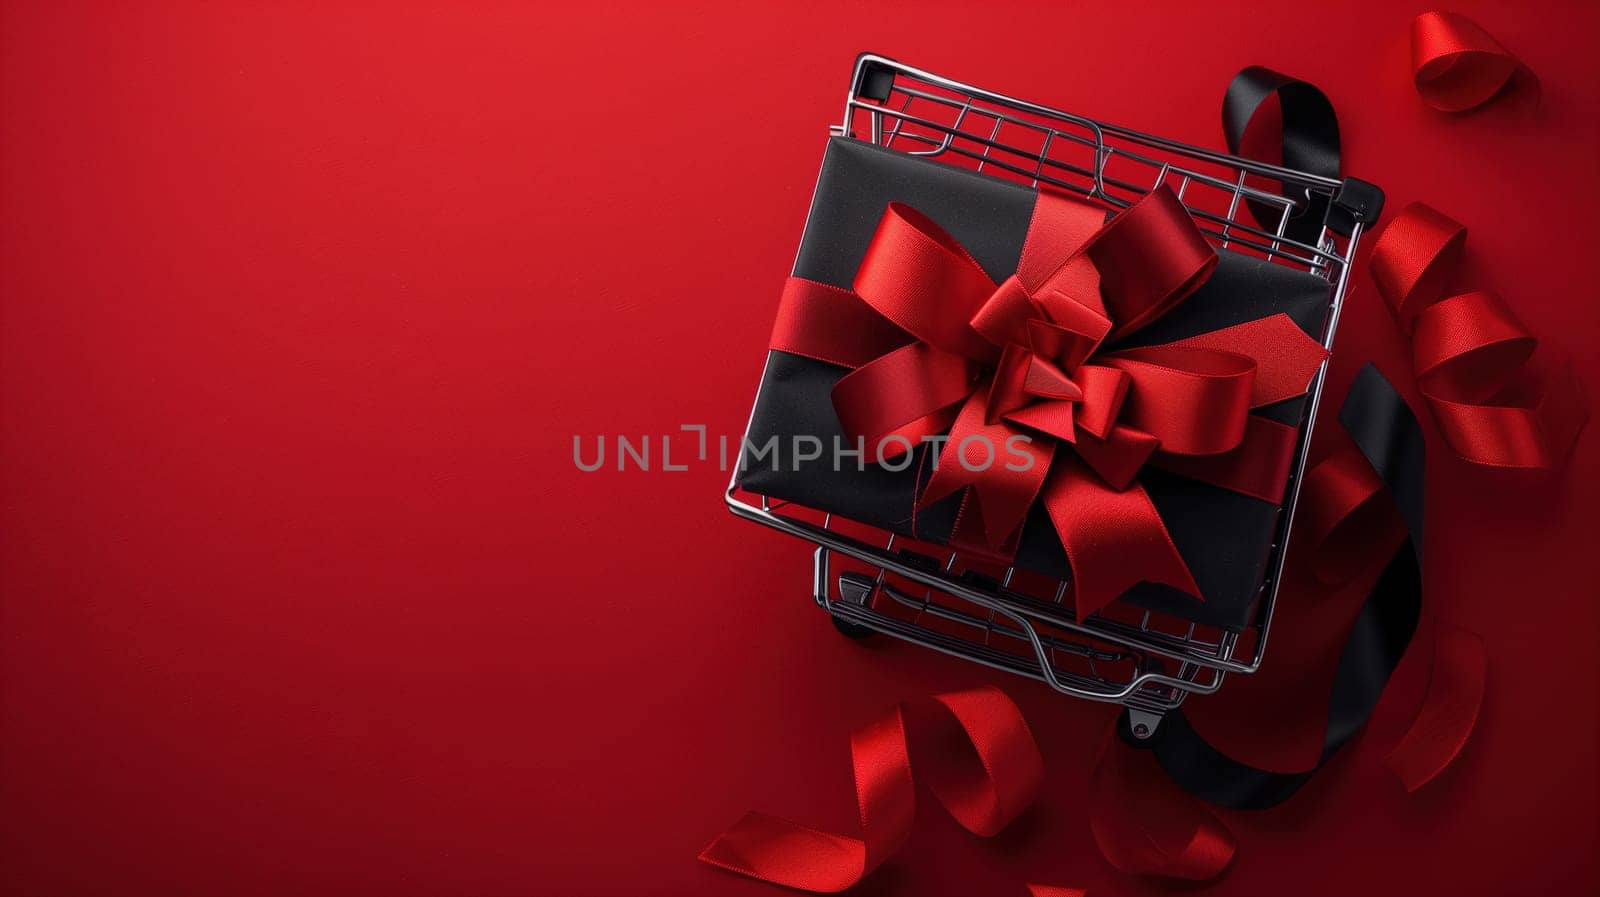 A shopping cart with a festive red bow on it, symbolizing a sale or Black Friday concept. The cart is empty, ready to be filled with discounted items for a shopping spree.